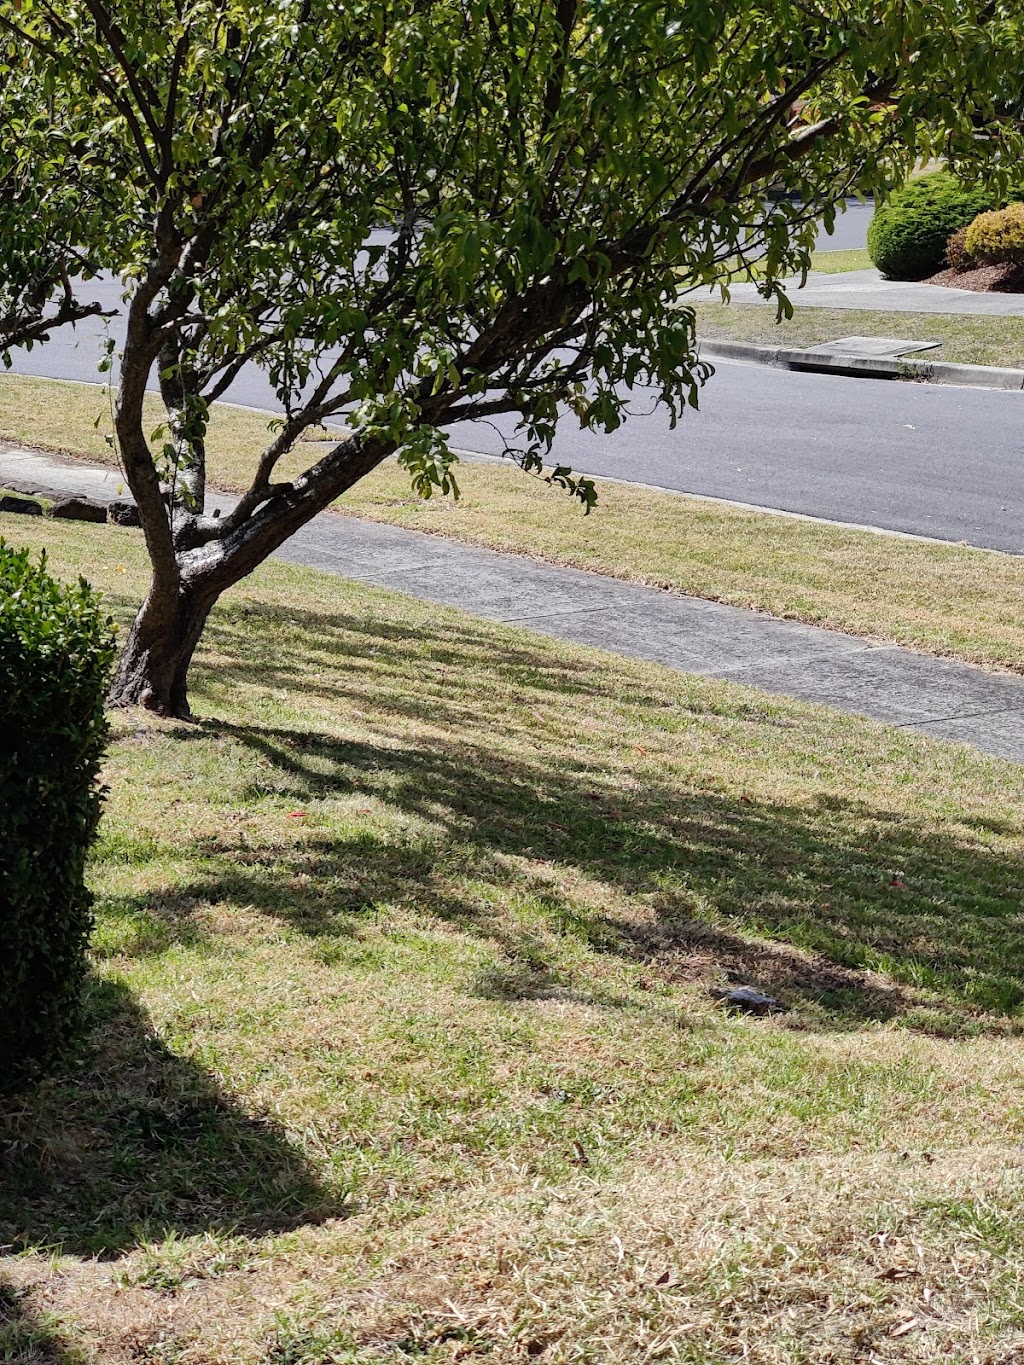 Topcut Lawn mowing Clyde | point of interest | 22 Sikes Rd, Clyde North VIC 3978, Australia | 0456082050 OR +61 456 082 050